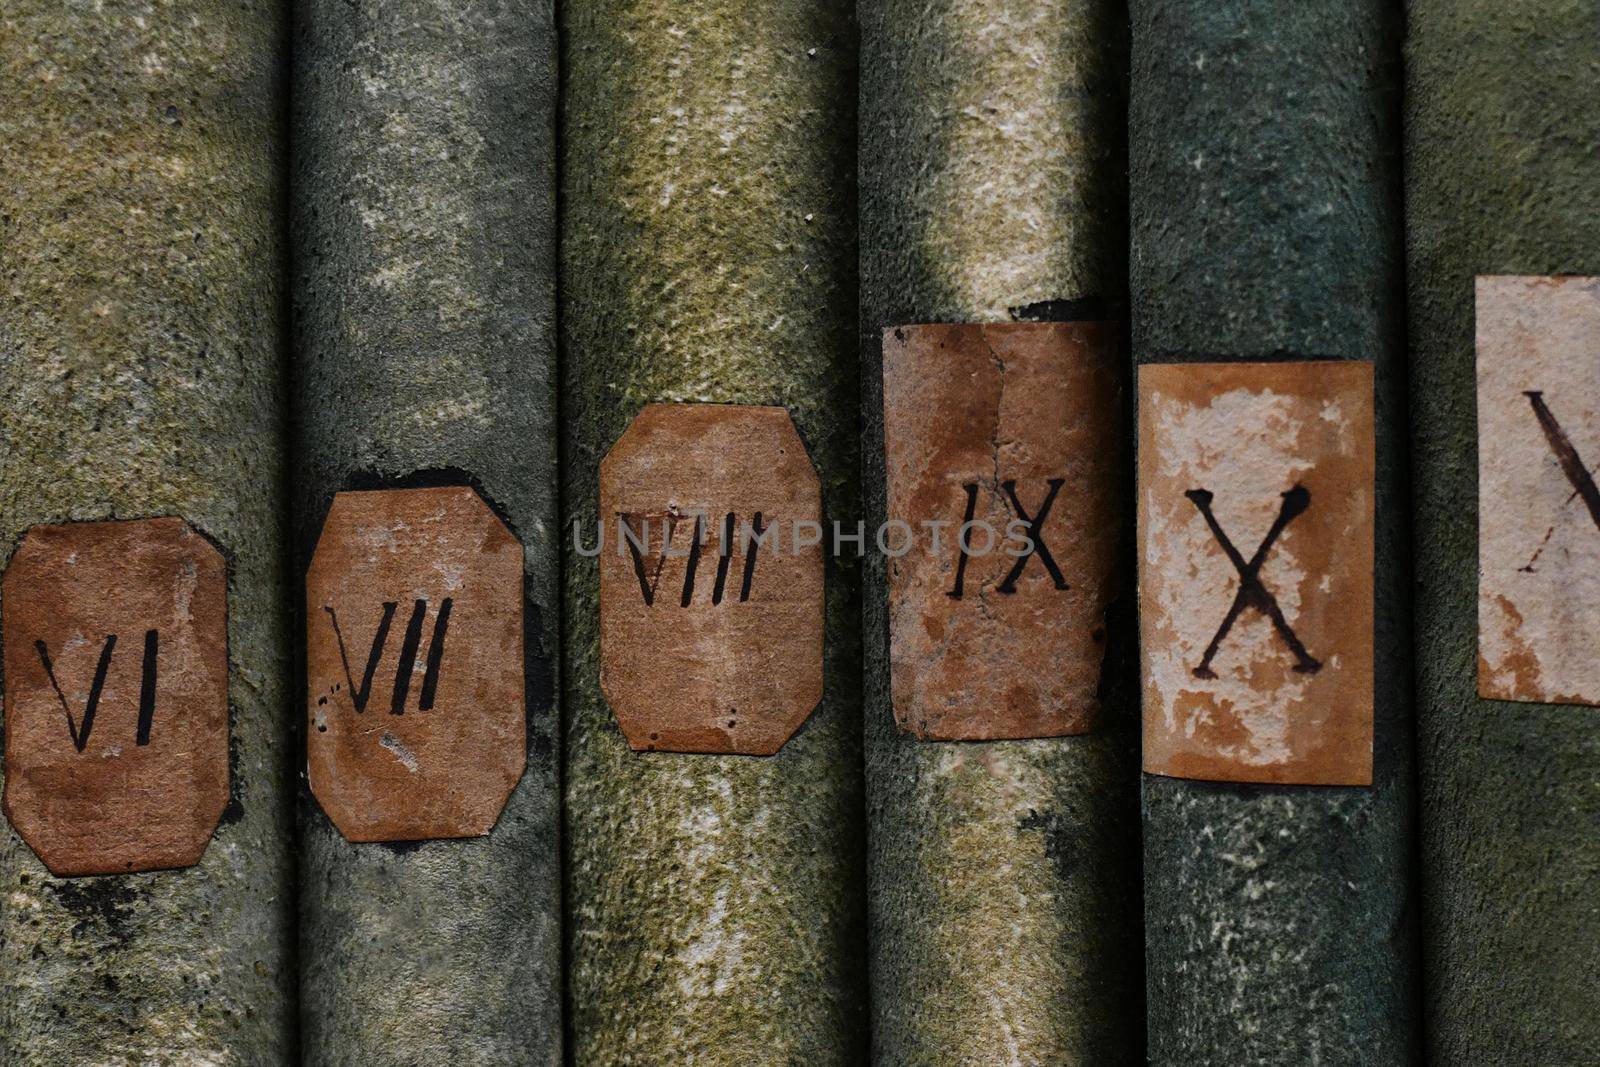 Old books with Roman numerals in the library archive